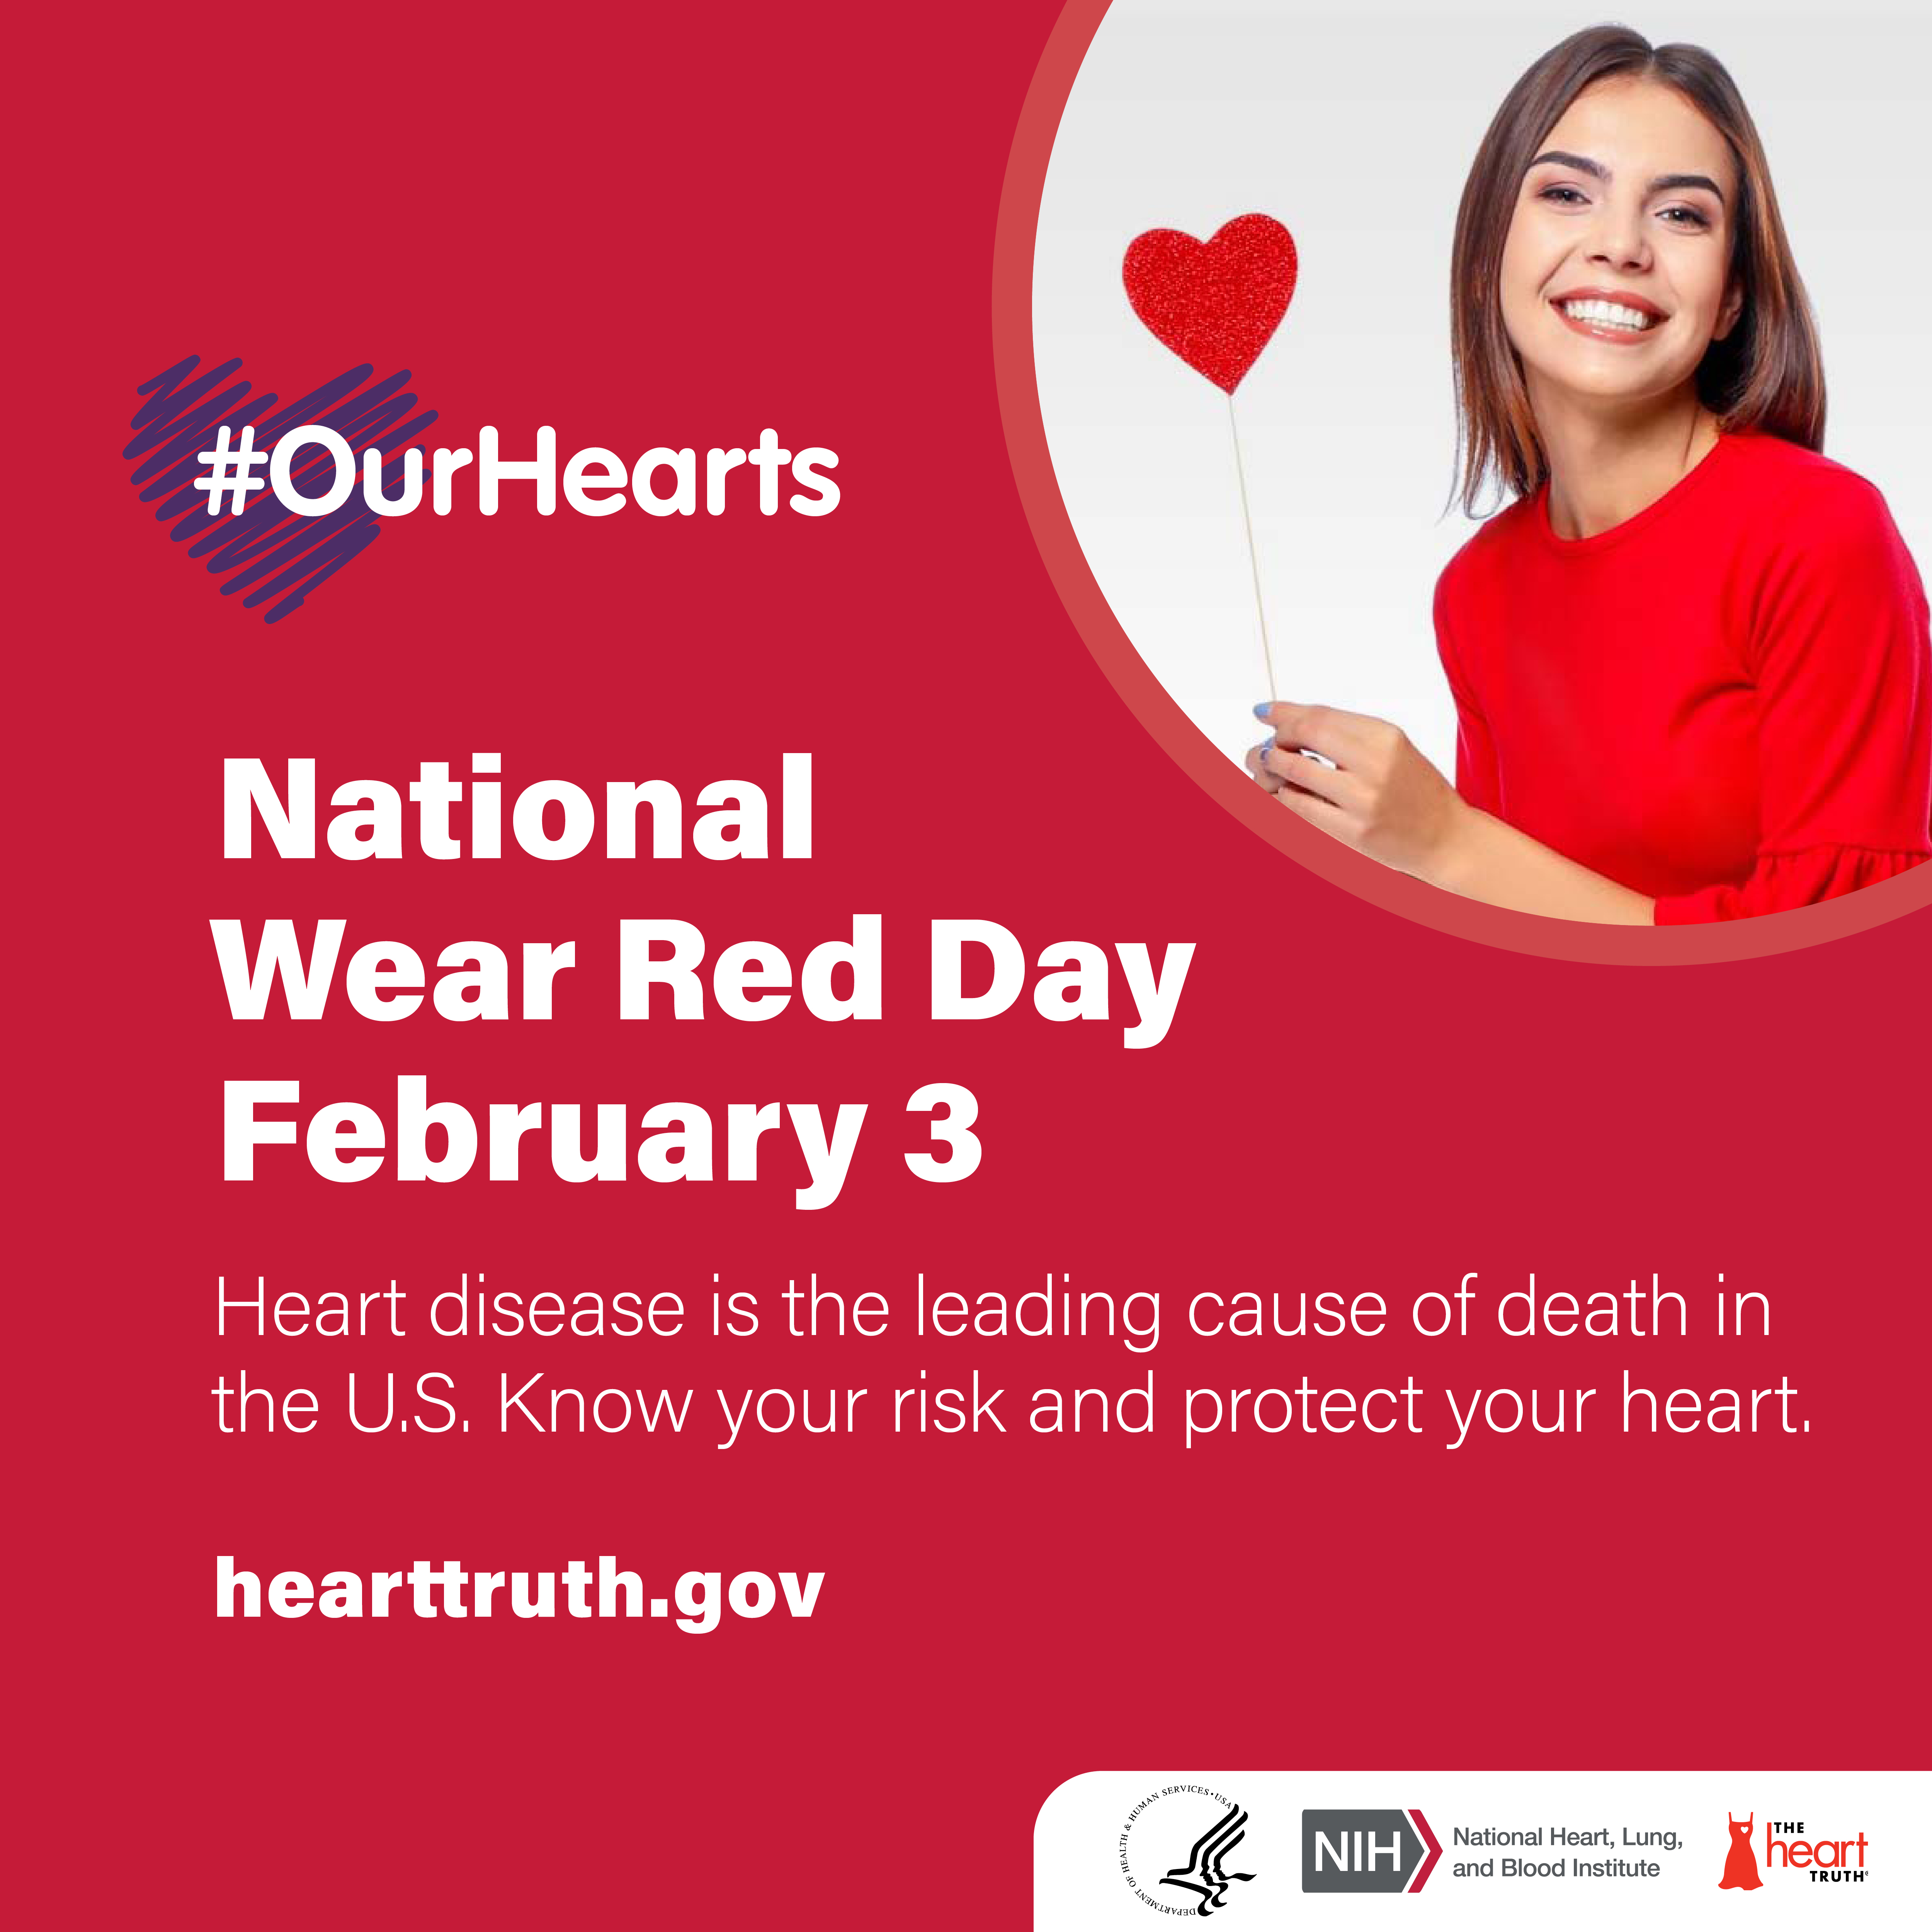 National Wear Red Day, February 3.